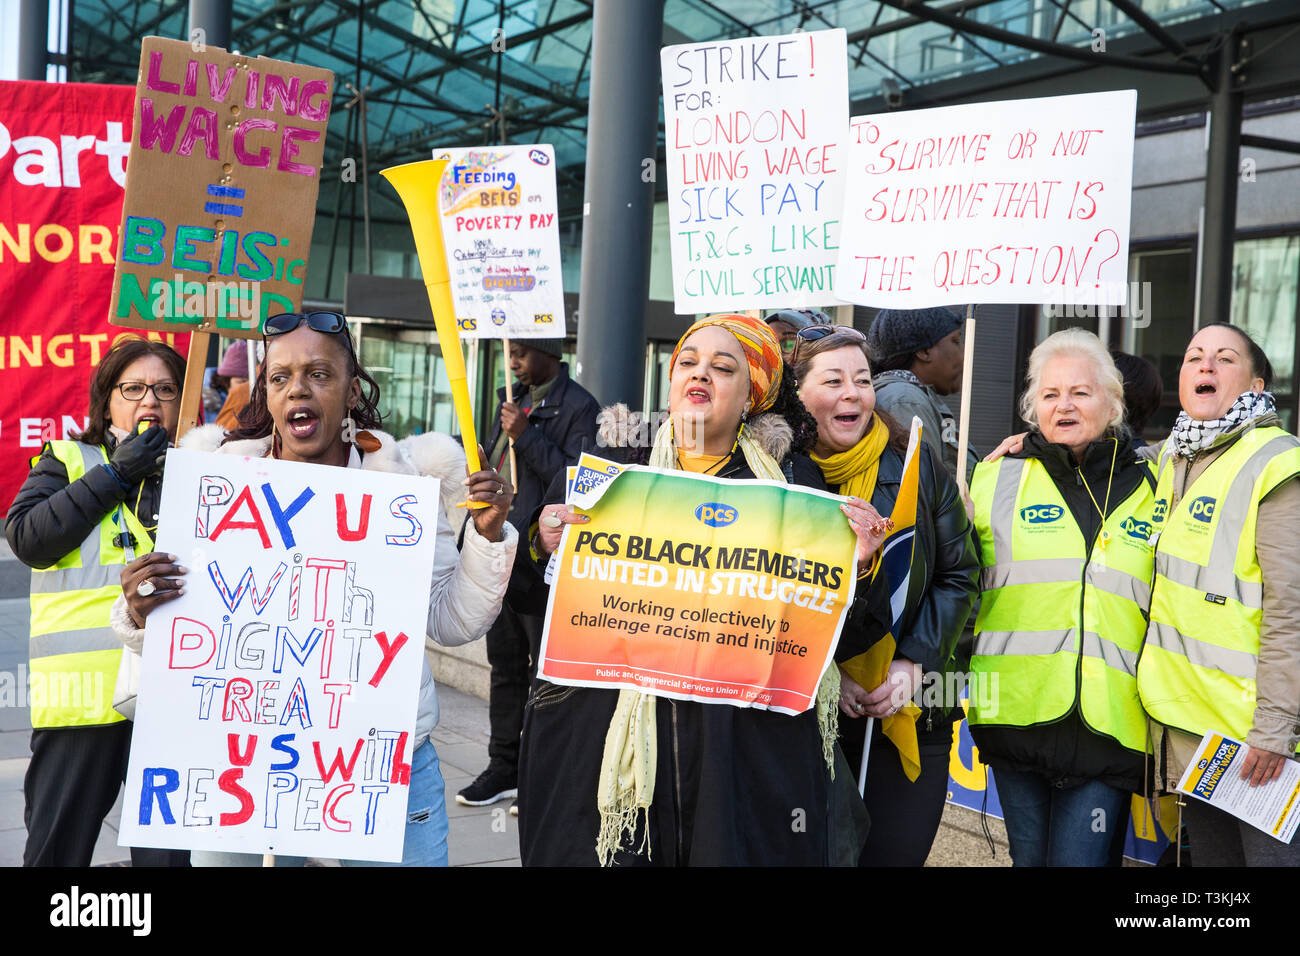 London, UK. 10th April 2019. Outsourced workers belonging to the Public & Commercial Services (PCS) union stand on a picket line outside their place o Stock Photo